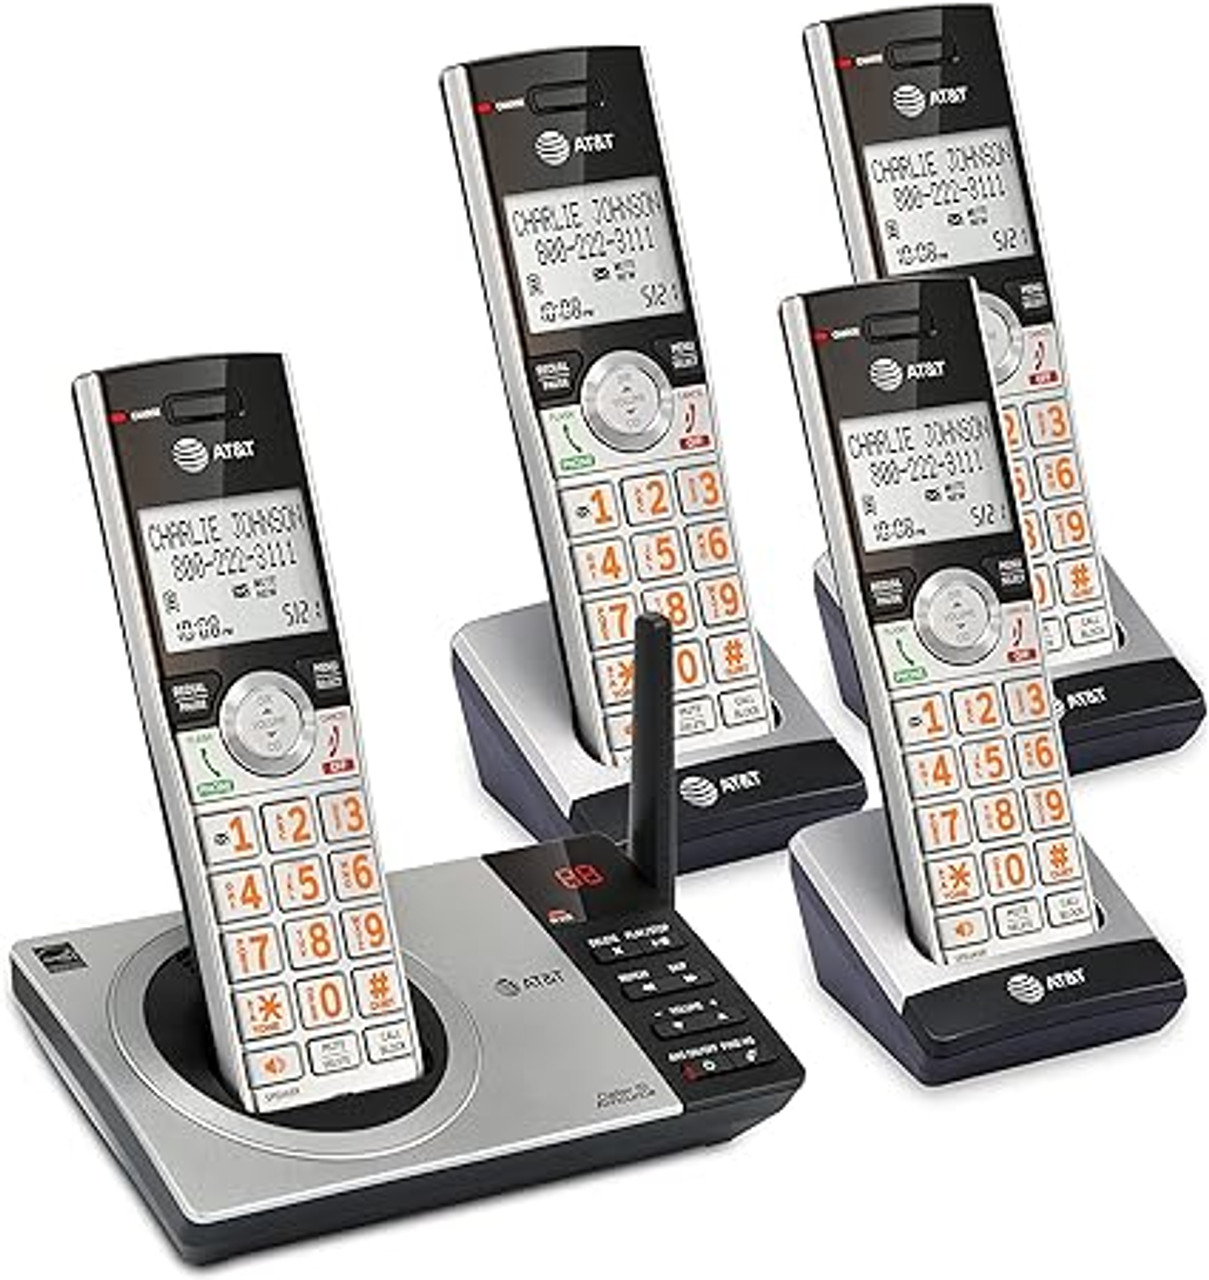 Home Phones with Answering Machines